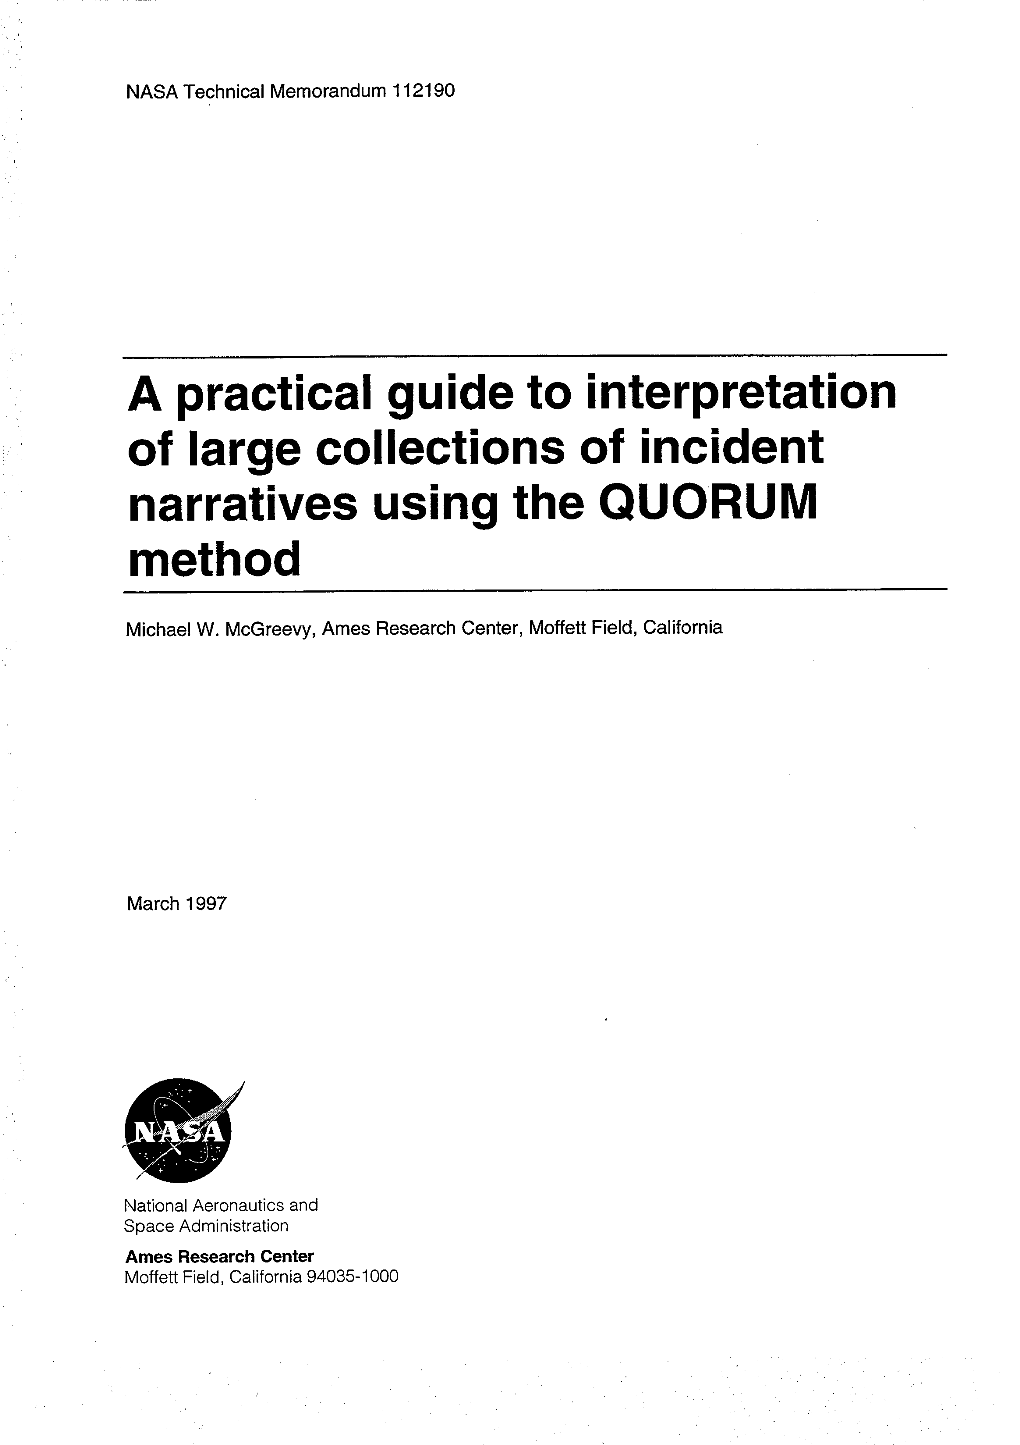 A Practical Guide to Interpretation of Large Collections of Incident Narratives Using the QUORUM Method